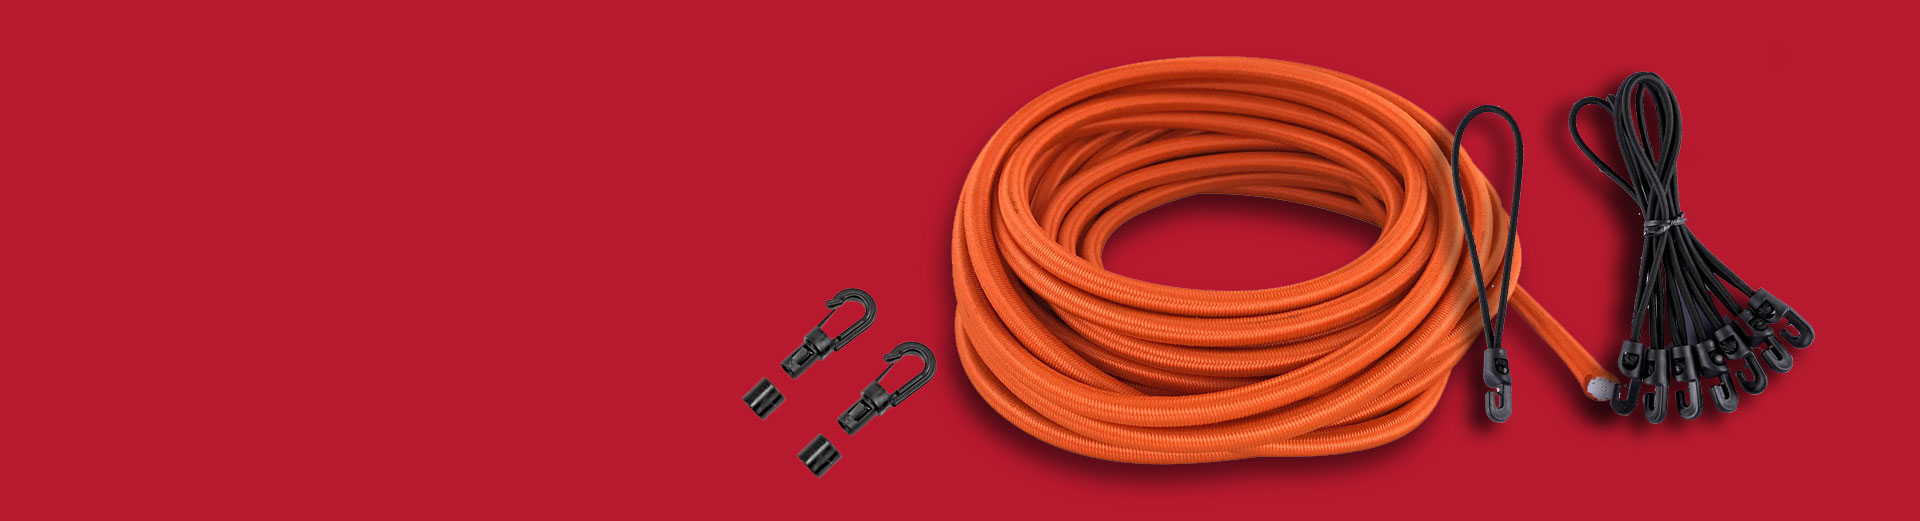 Am Power Cord Corporation, Manufactures & Suppliers of
elastic cord, bungee cord